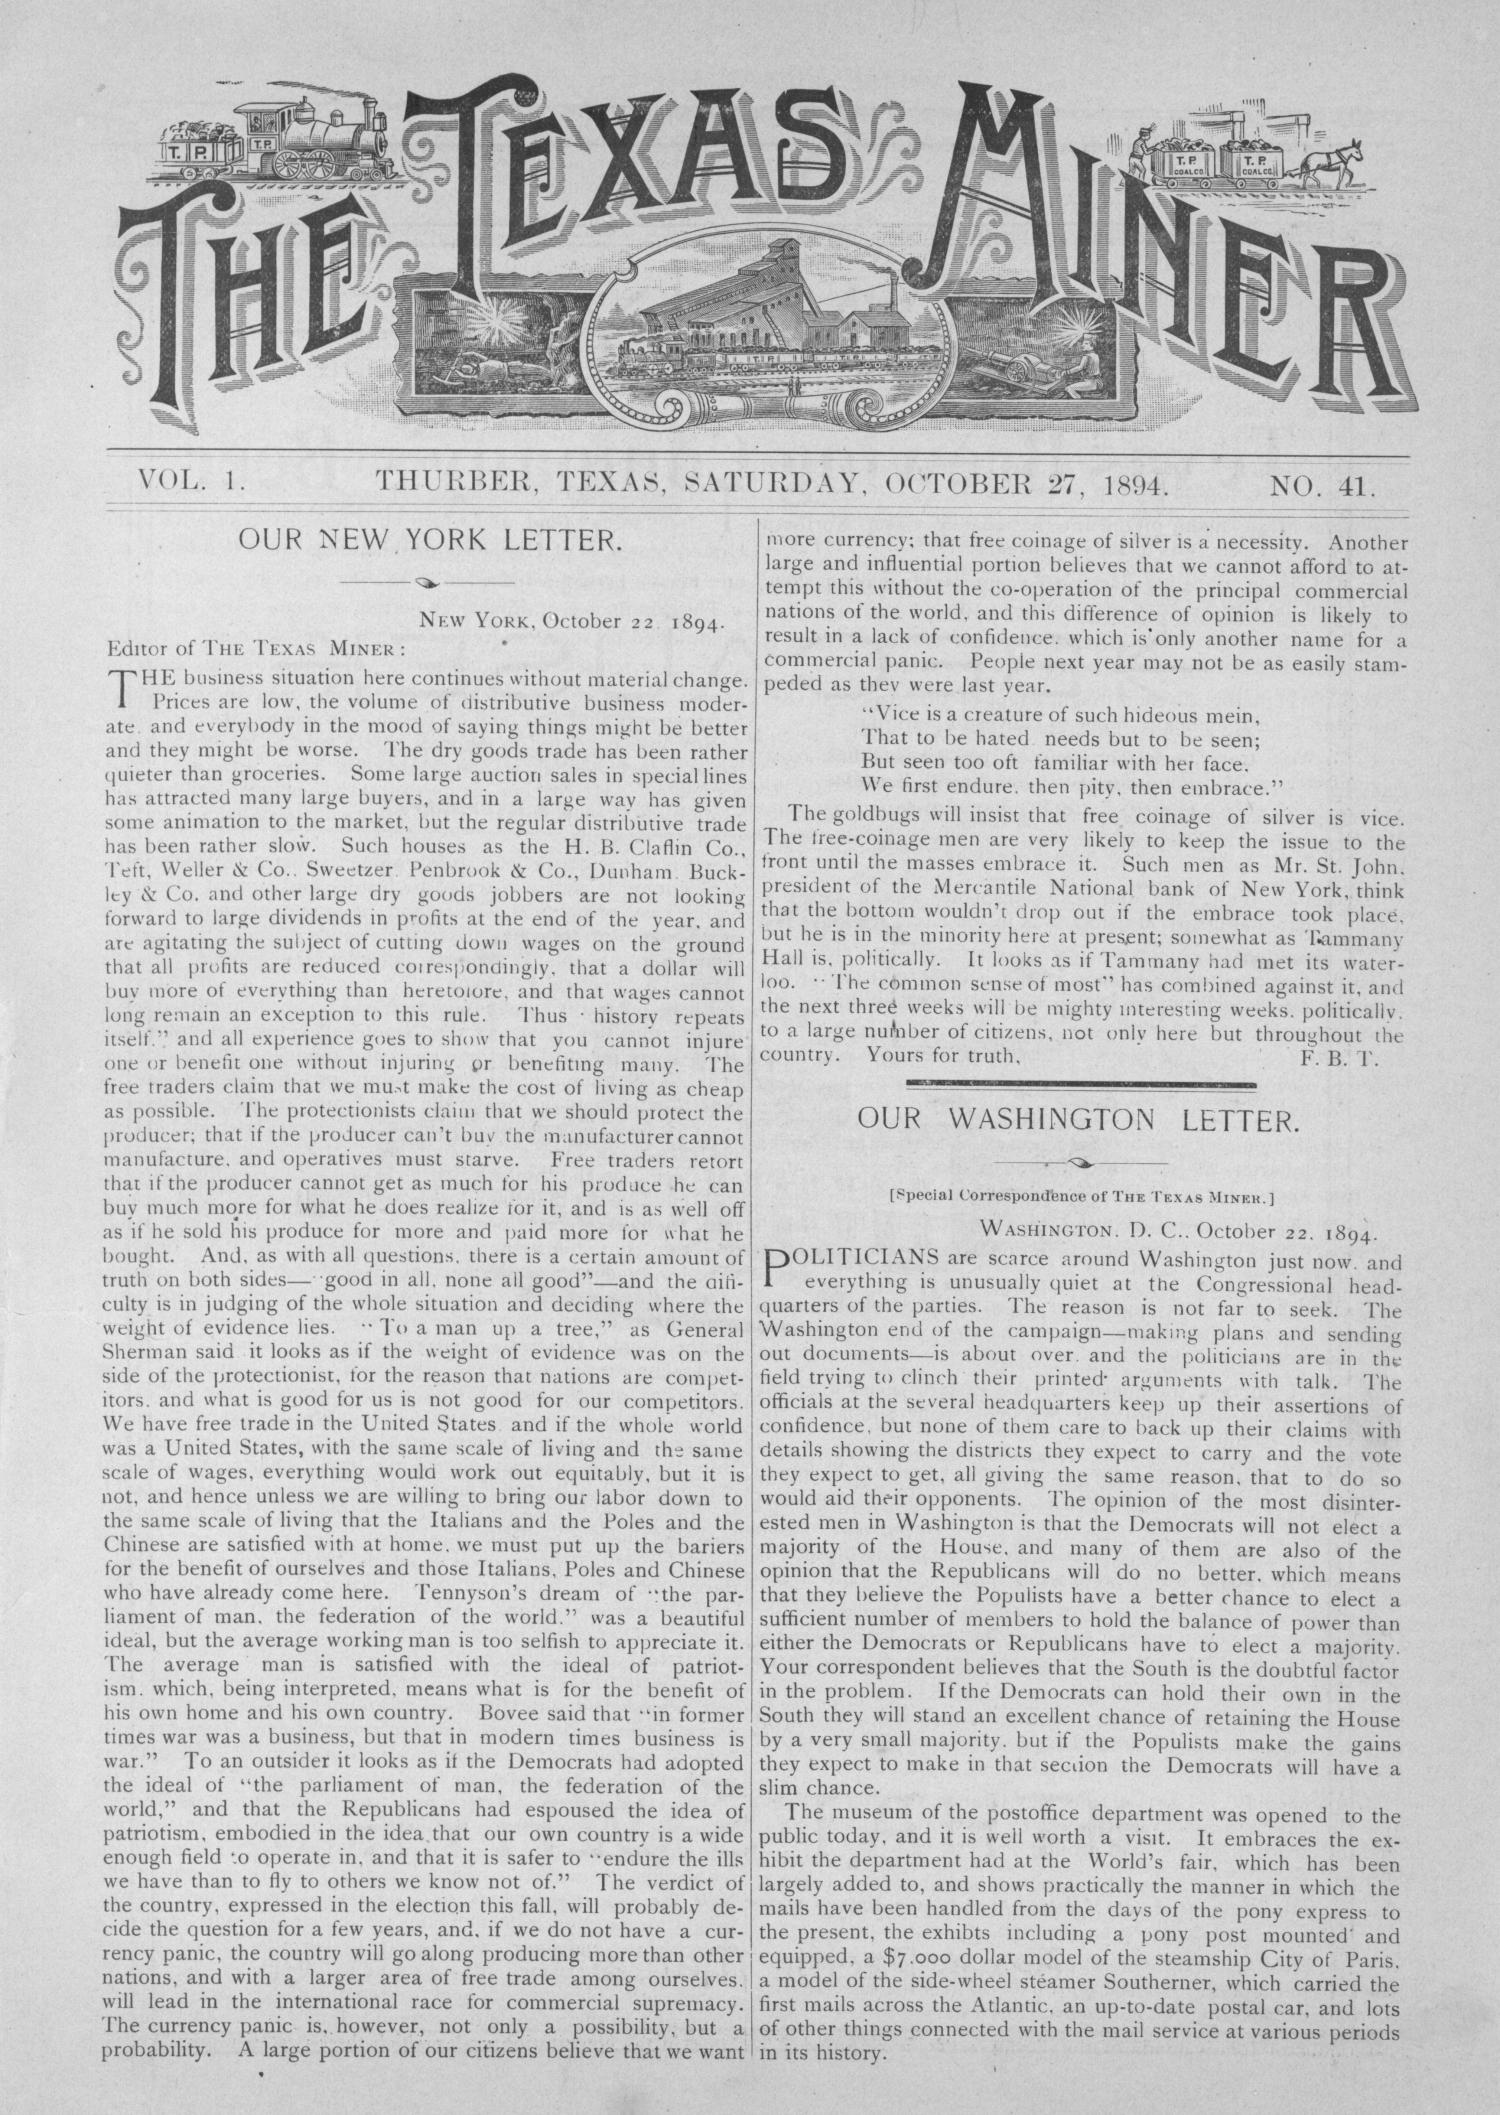 The Texas Miner, Volume 1, Number 41, October 27, 1894
                                                
                                                    1
                                                